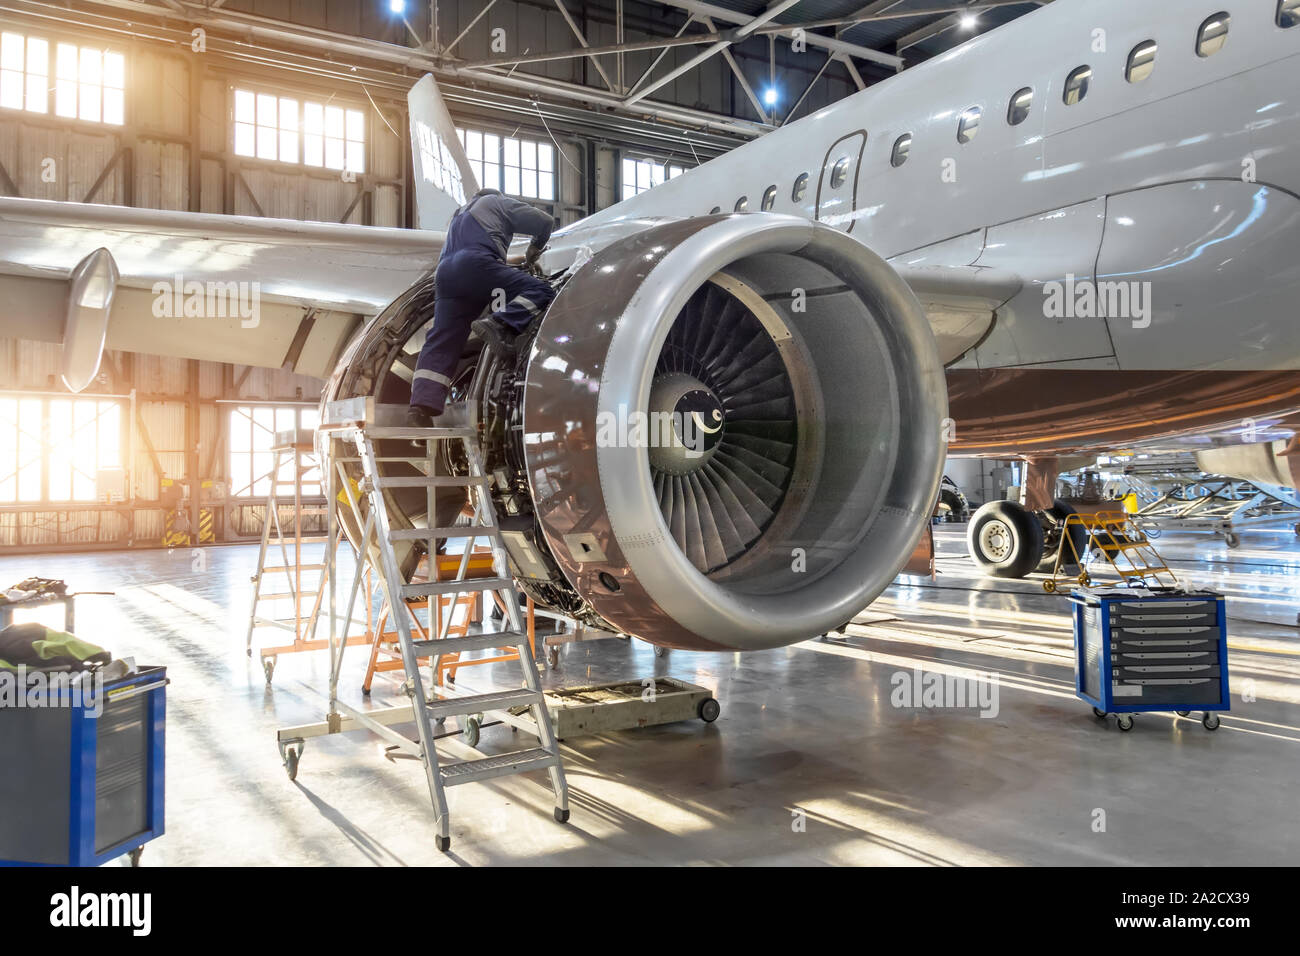 Mechanic specialist repairs the maintenance of engine of a passenger aircraft in a hangar. Stock Photo